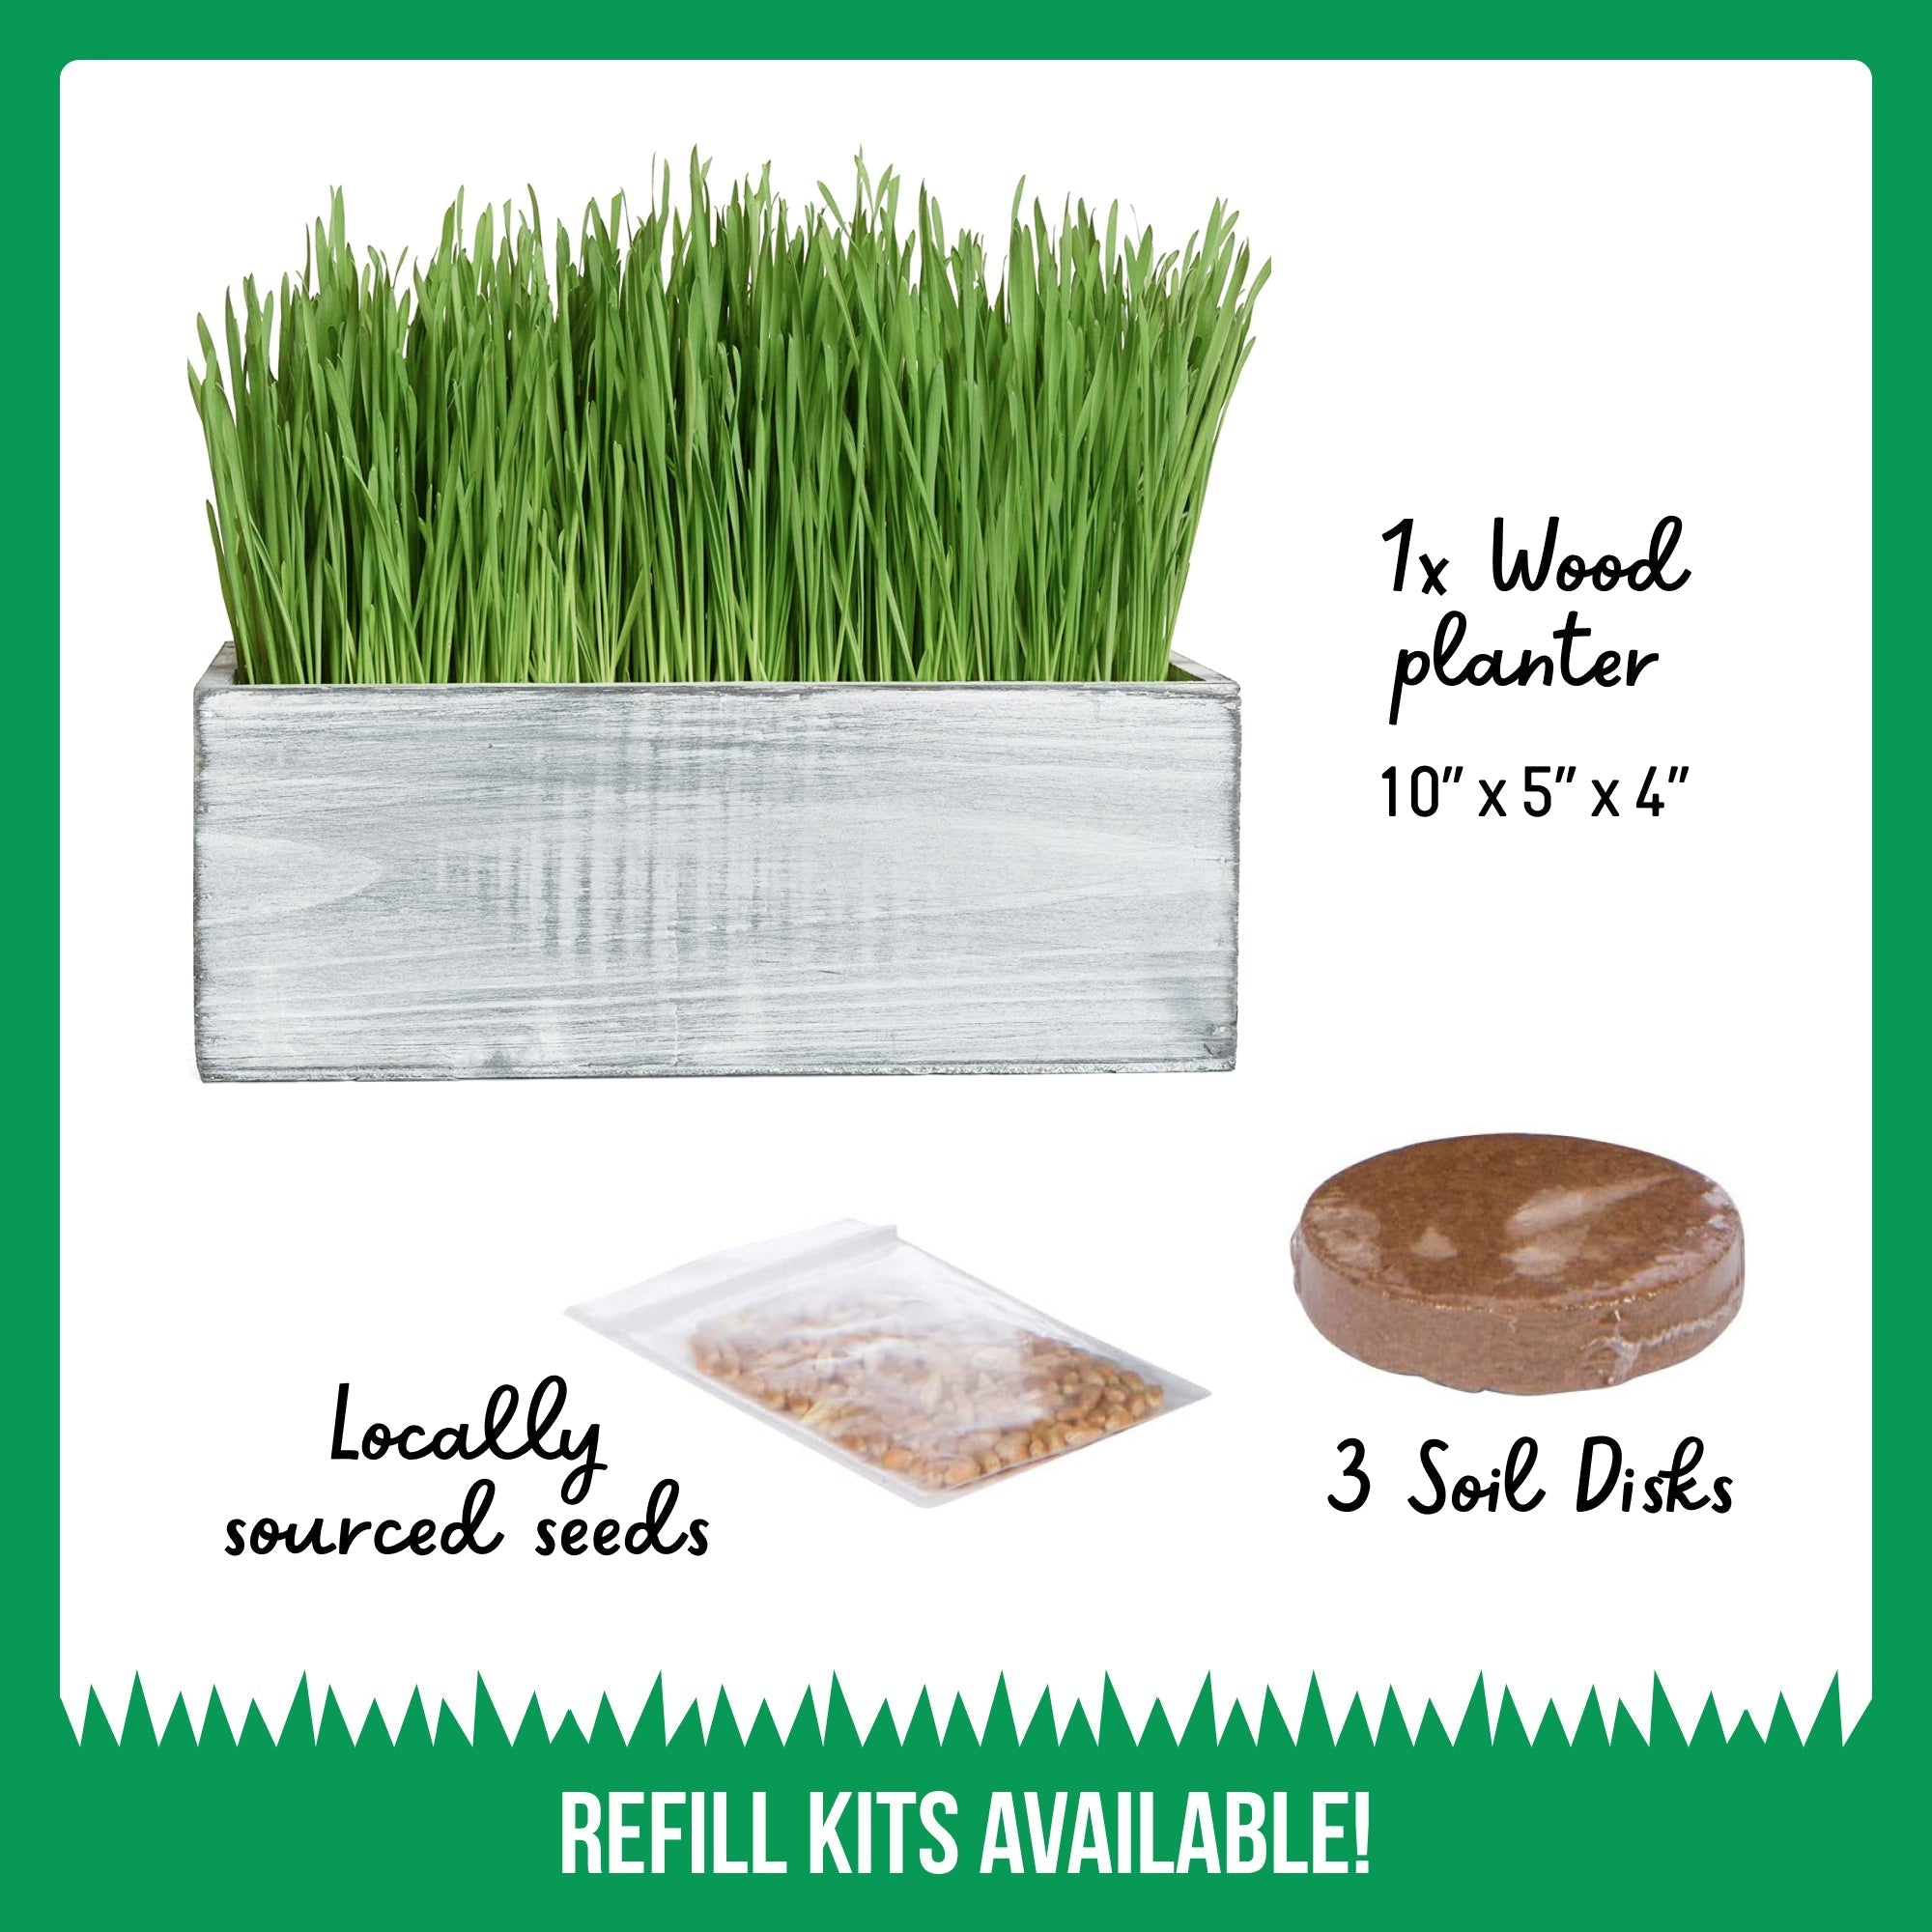 Cat Grass Kit (Organic) Complete with Rustic Wood Planter, Seed and Soil - White